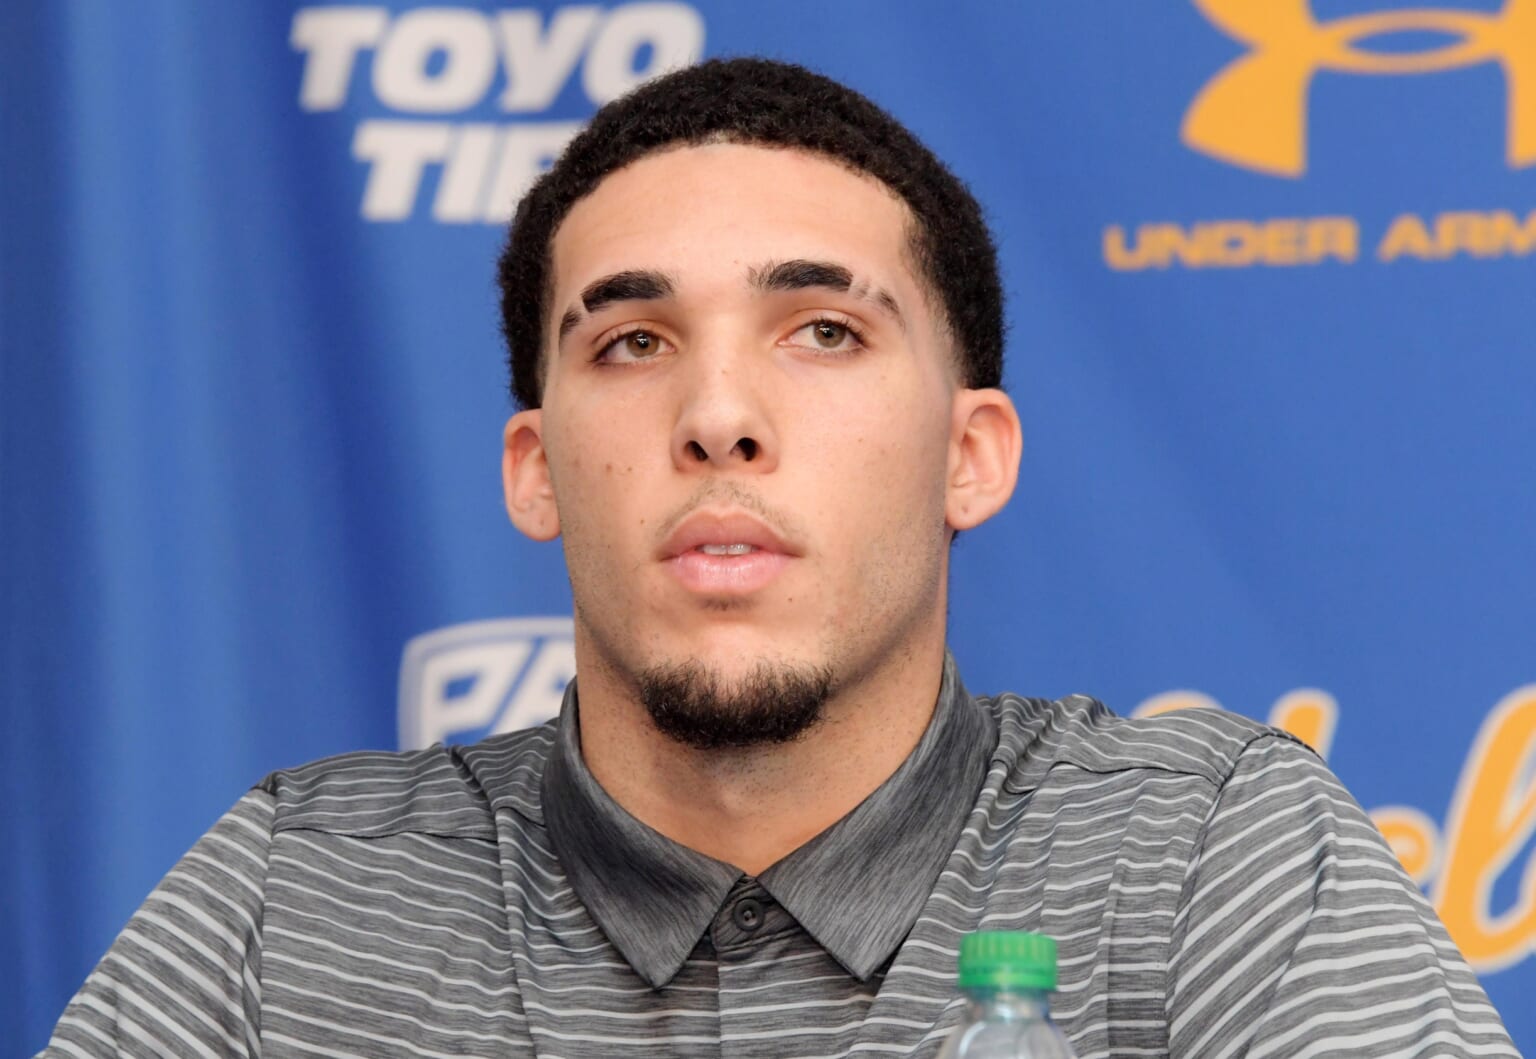 LiAngelo Ball signs with NBA G League, to play in Orlando bubble